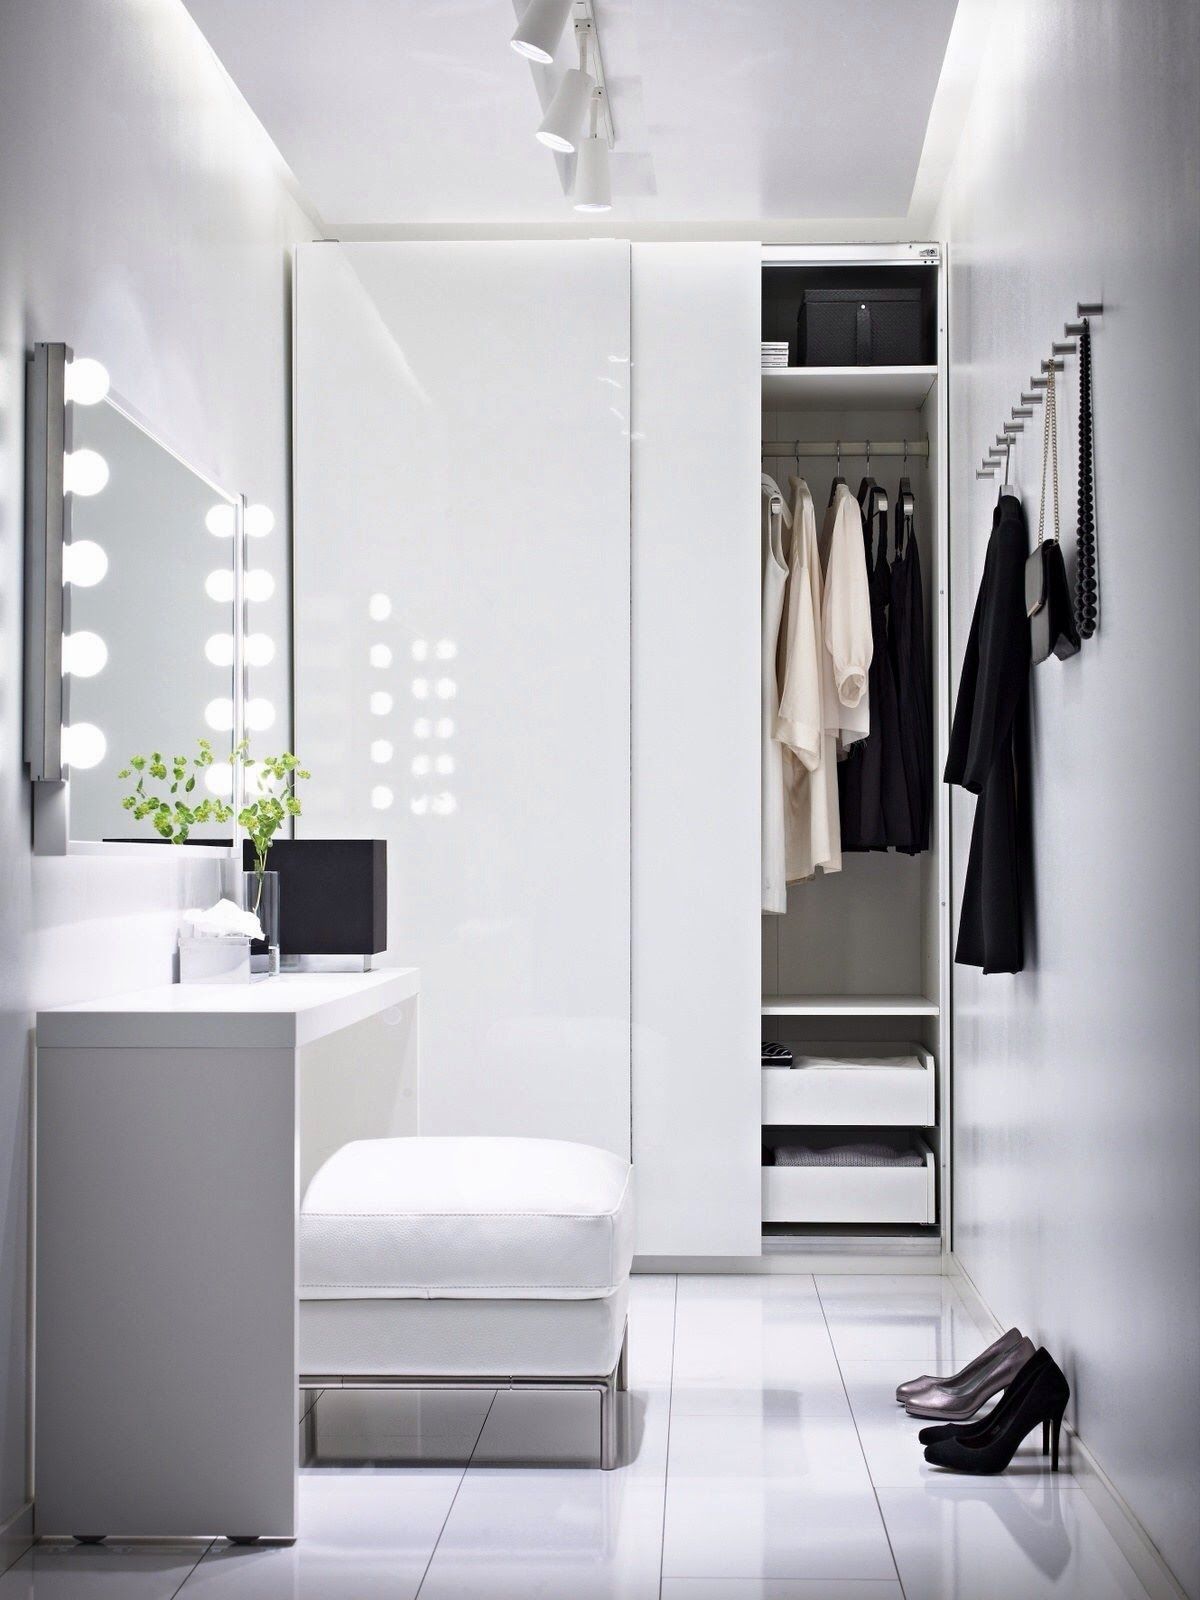 Traditional-Mirror-Light-With-Closet-Lighting-Fixtures-And-White-Theme